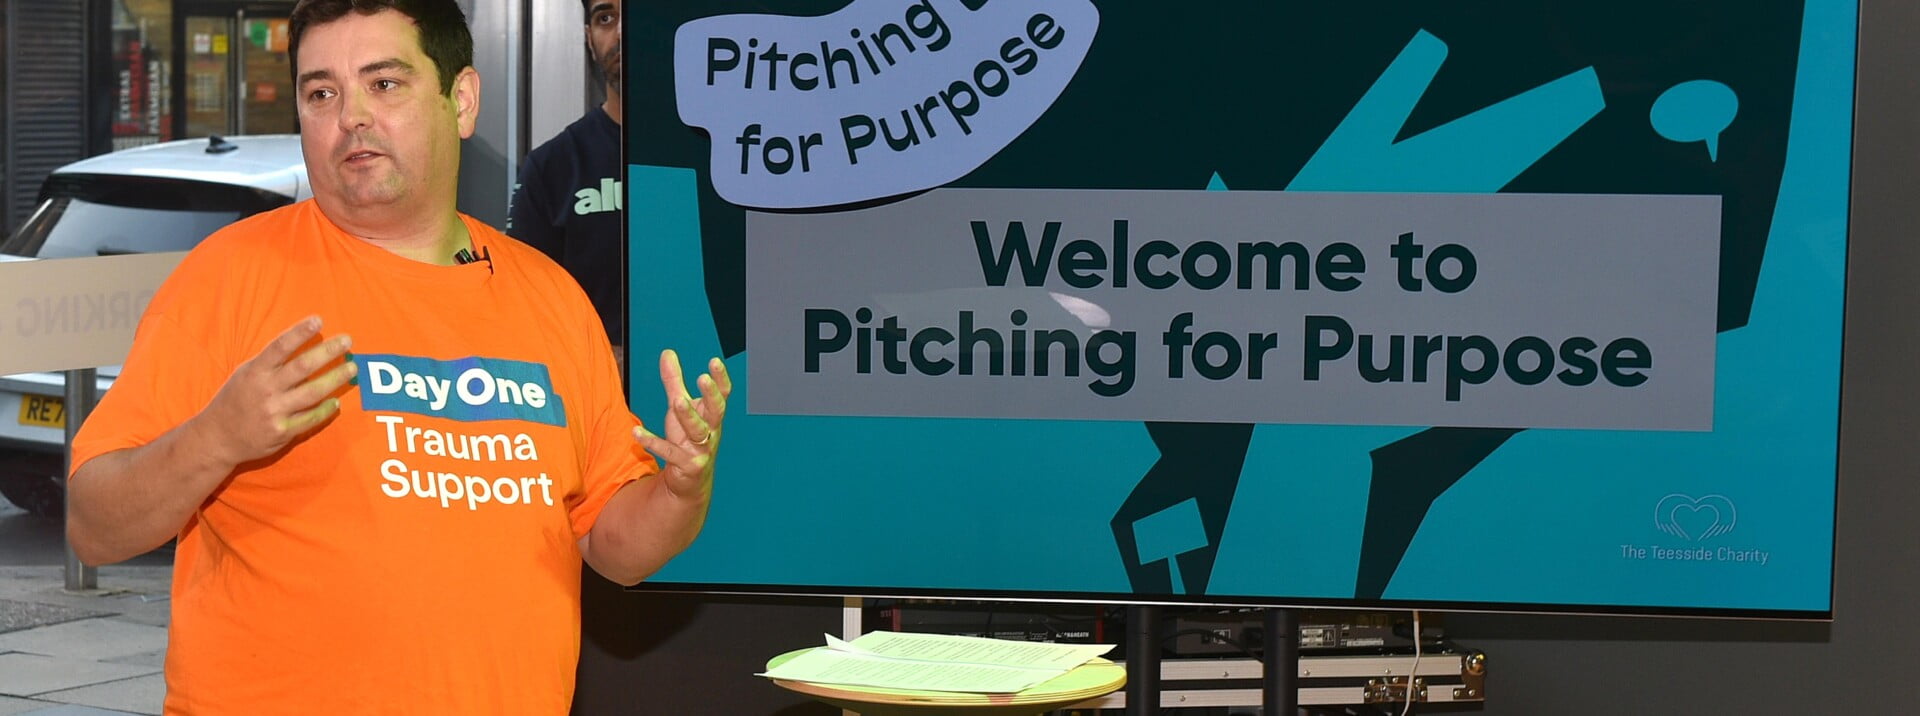 Pitching for Purpose is back!